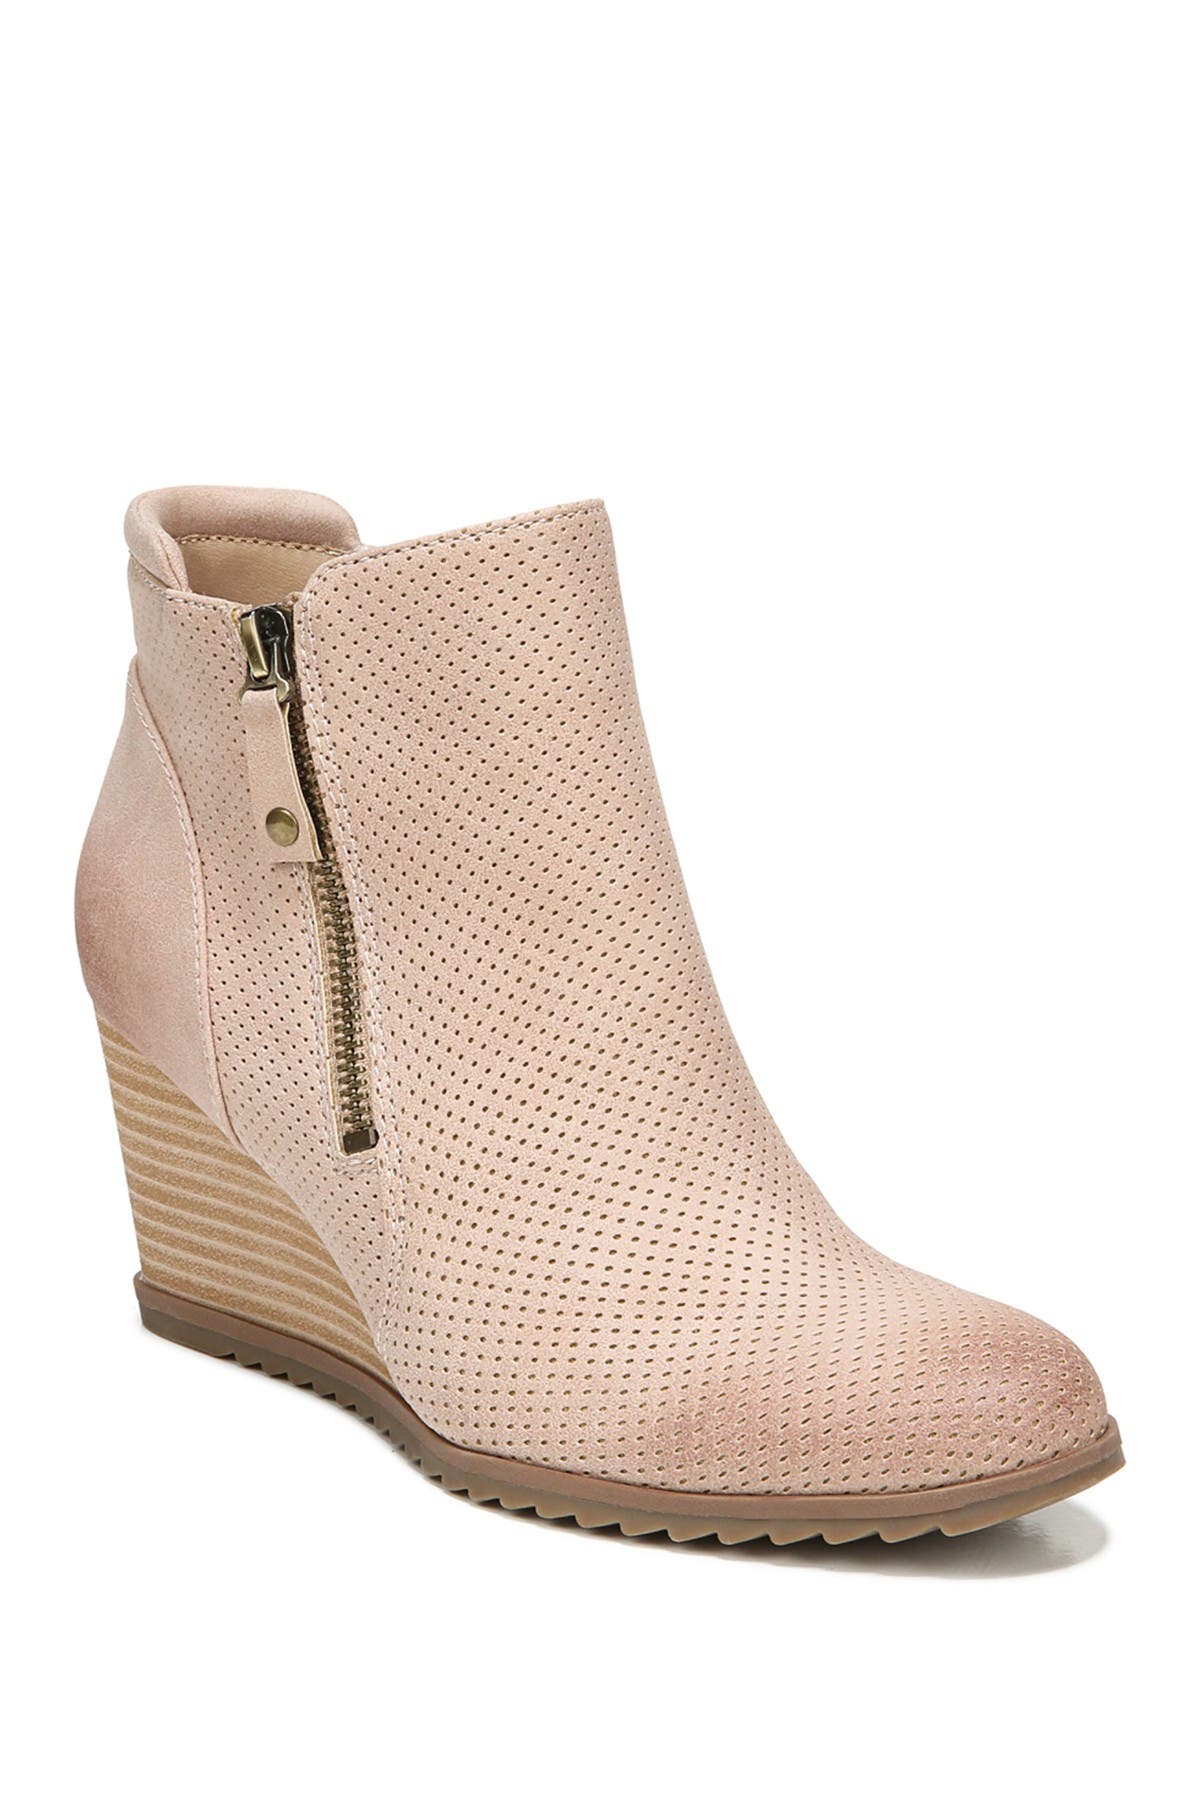 SOUL Naturalizer | Haley 2 Wedge Bootie 